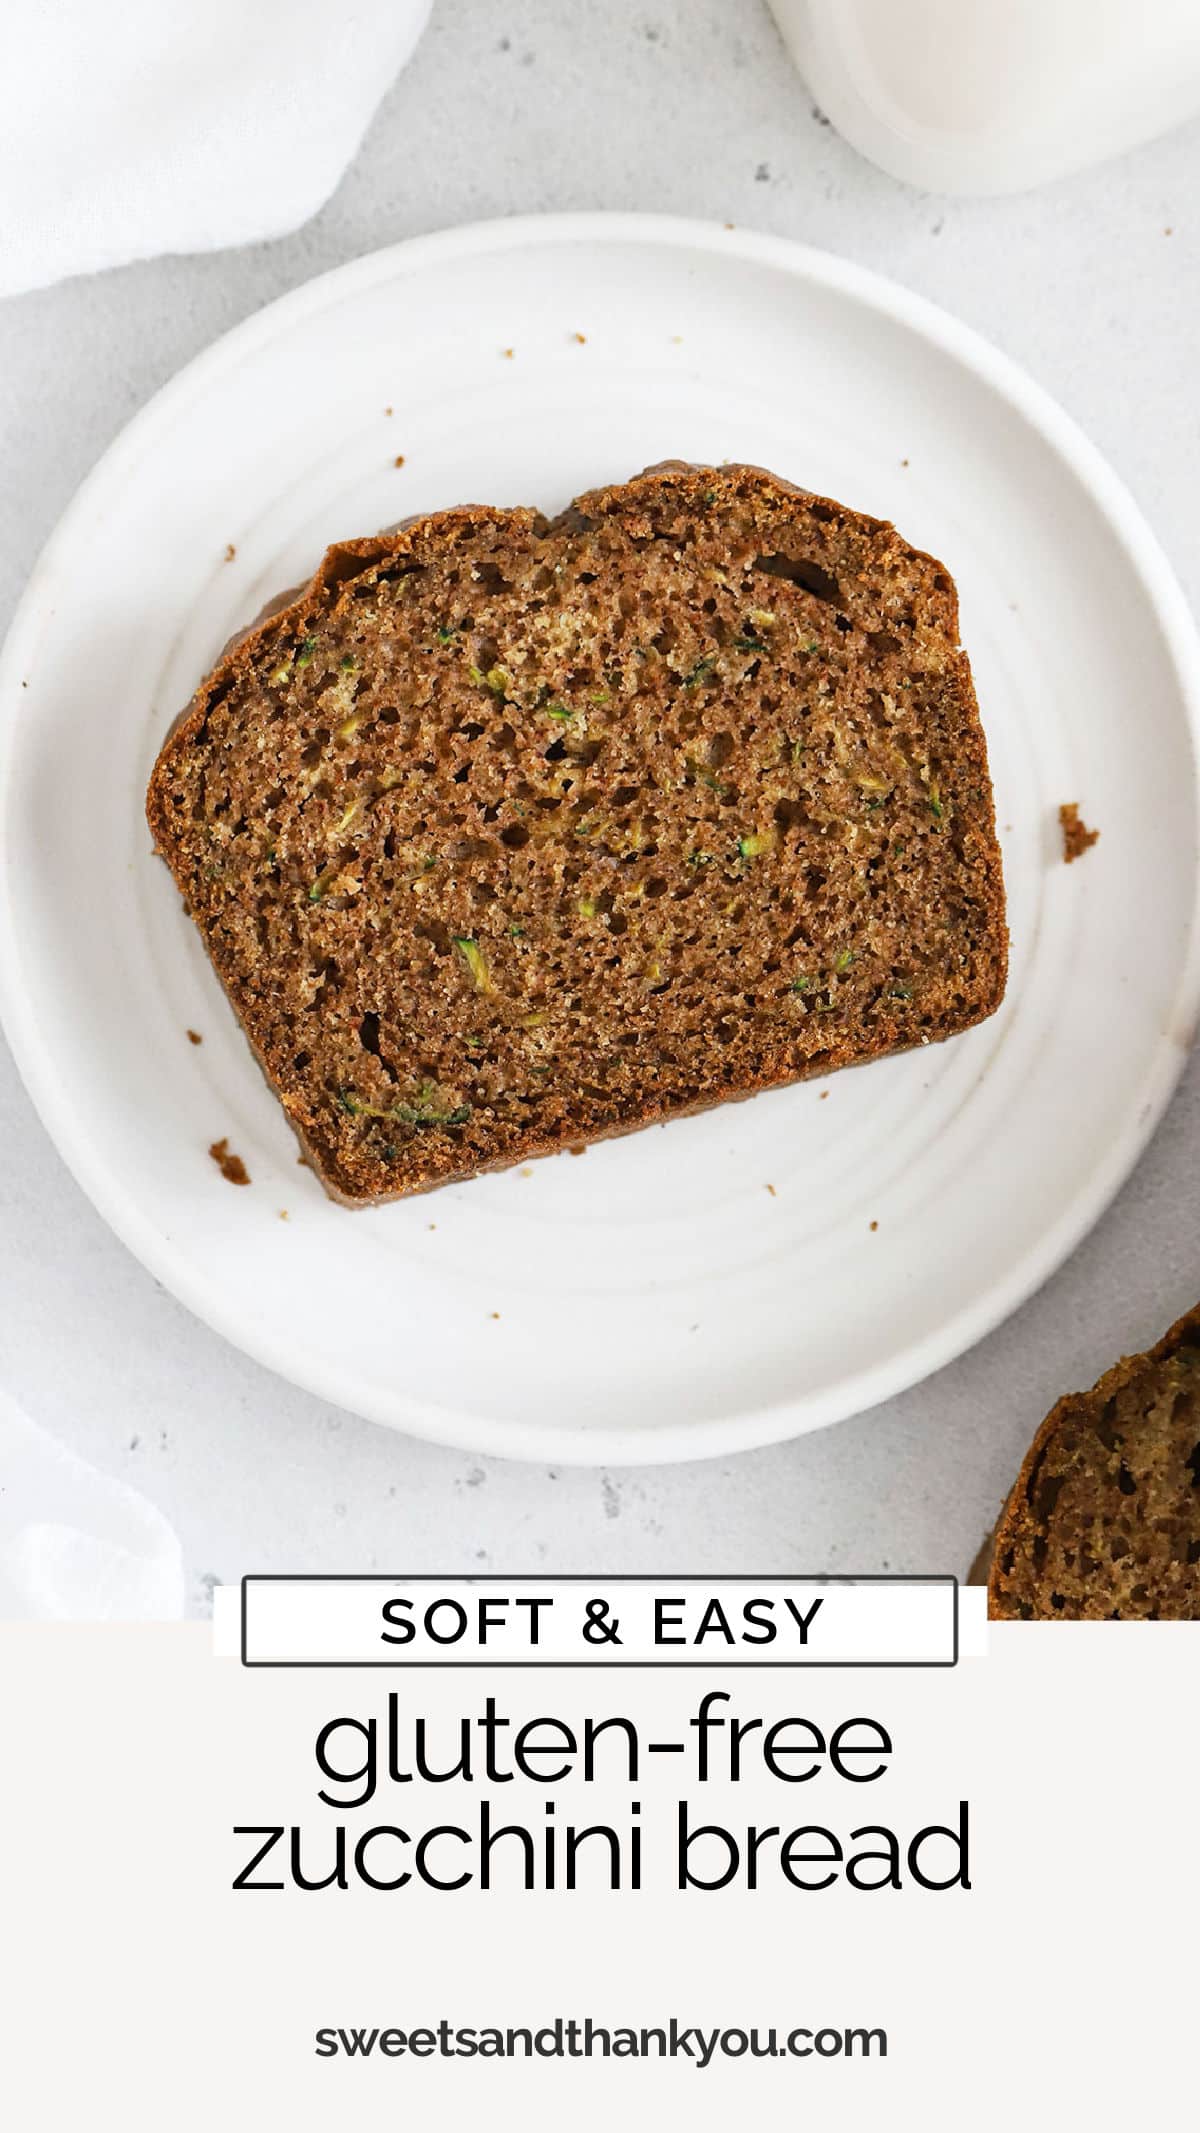 Summer is the perfect time to make this easy gluten-free zucchini bread recipe! You'll love the blend of spices, soft texture, and chocolate chips (or nuts) in every bite! / moist gluten free zucchini bread recipe / the best gluten-free zucchini bread recipe / gluten free chocolate chip zucchini bread / gluten free zucchini bread with walnuts /